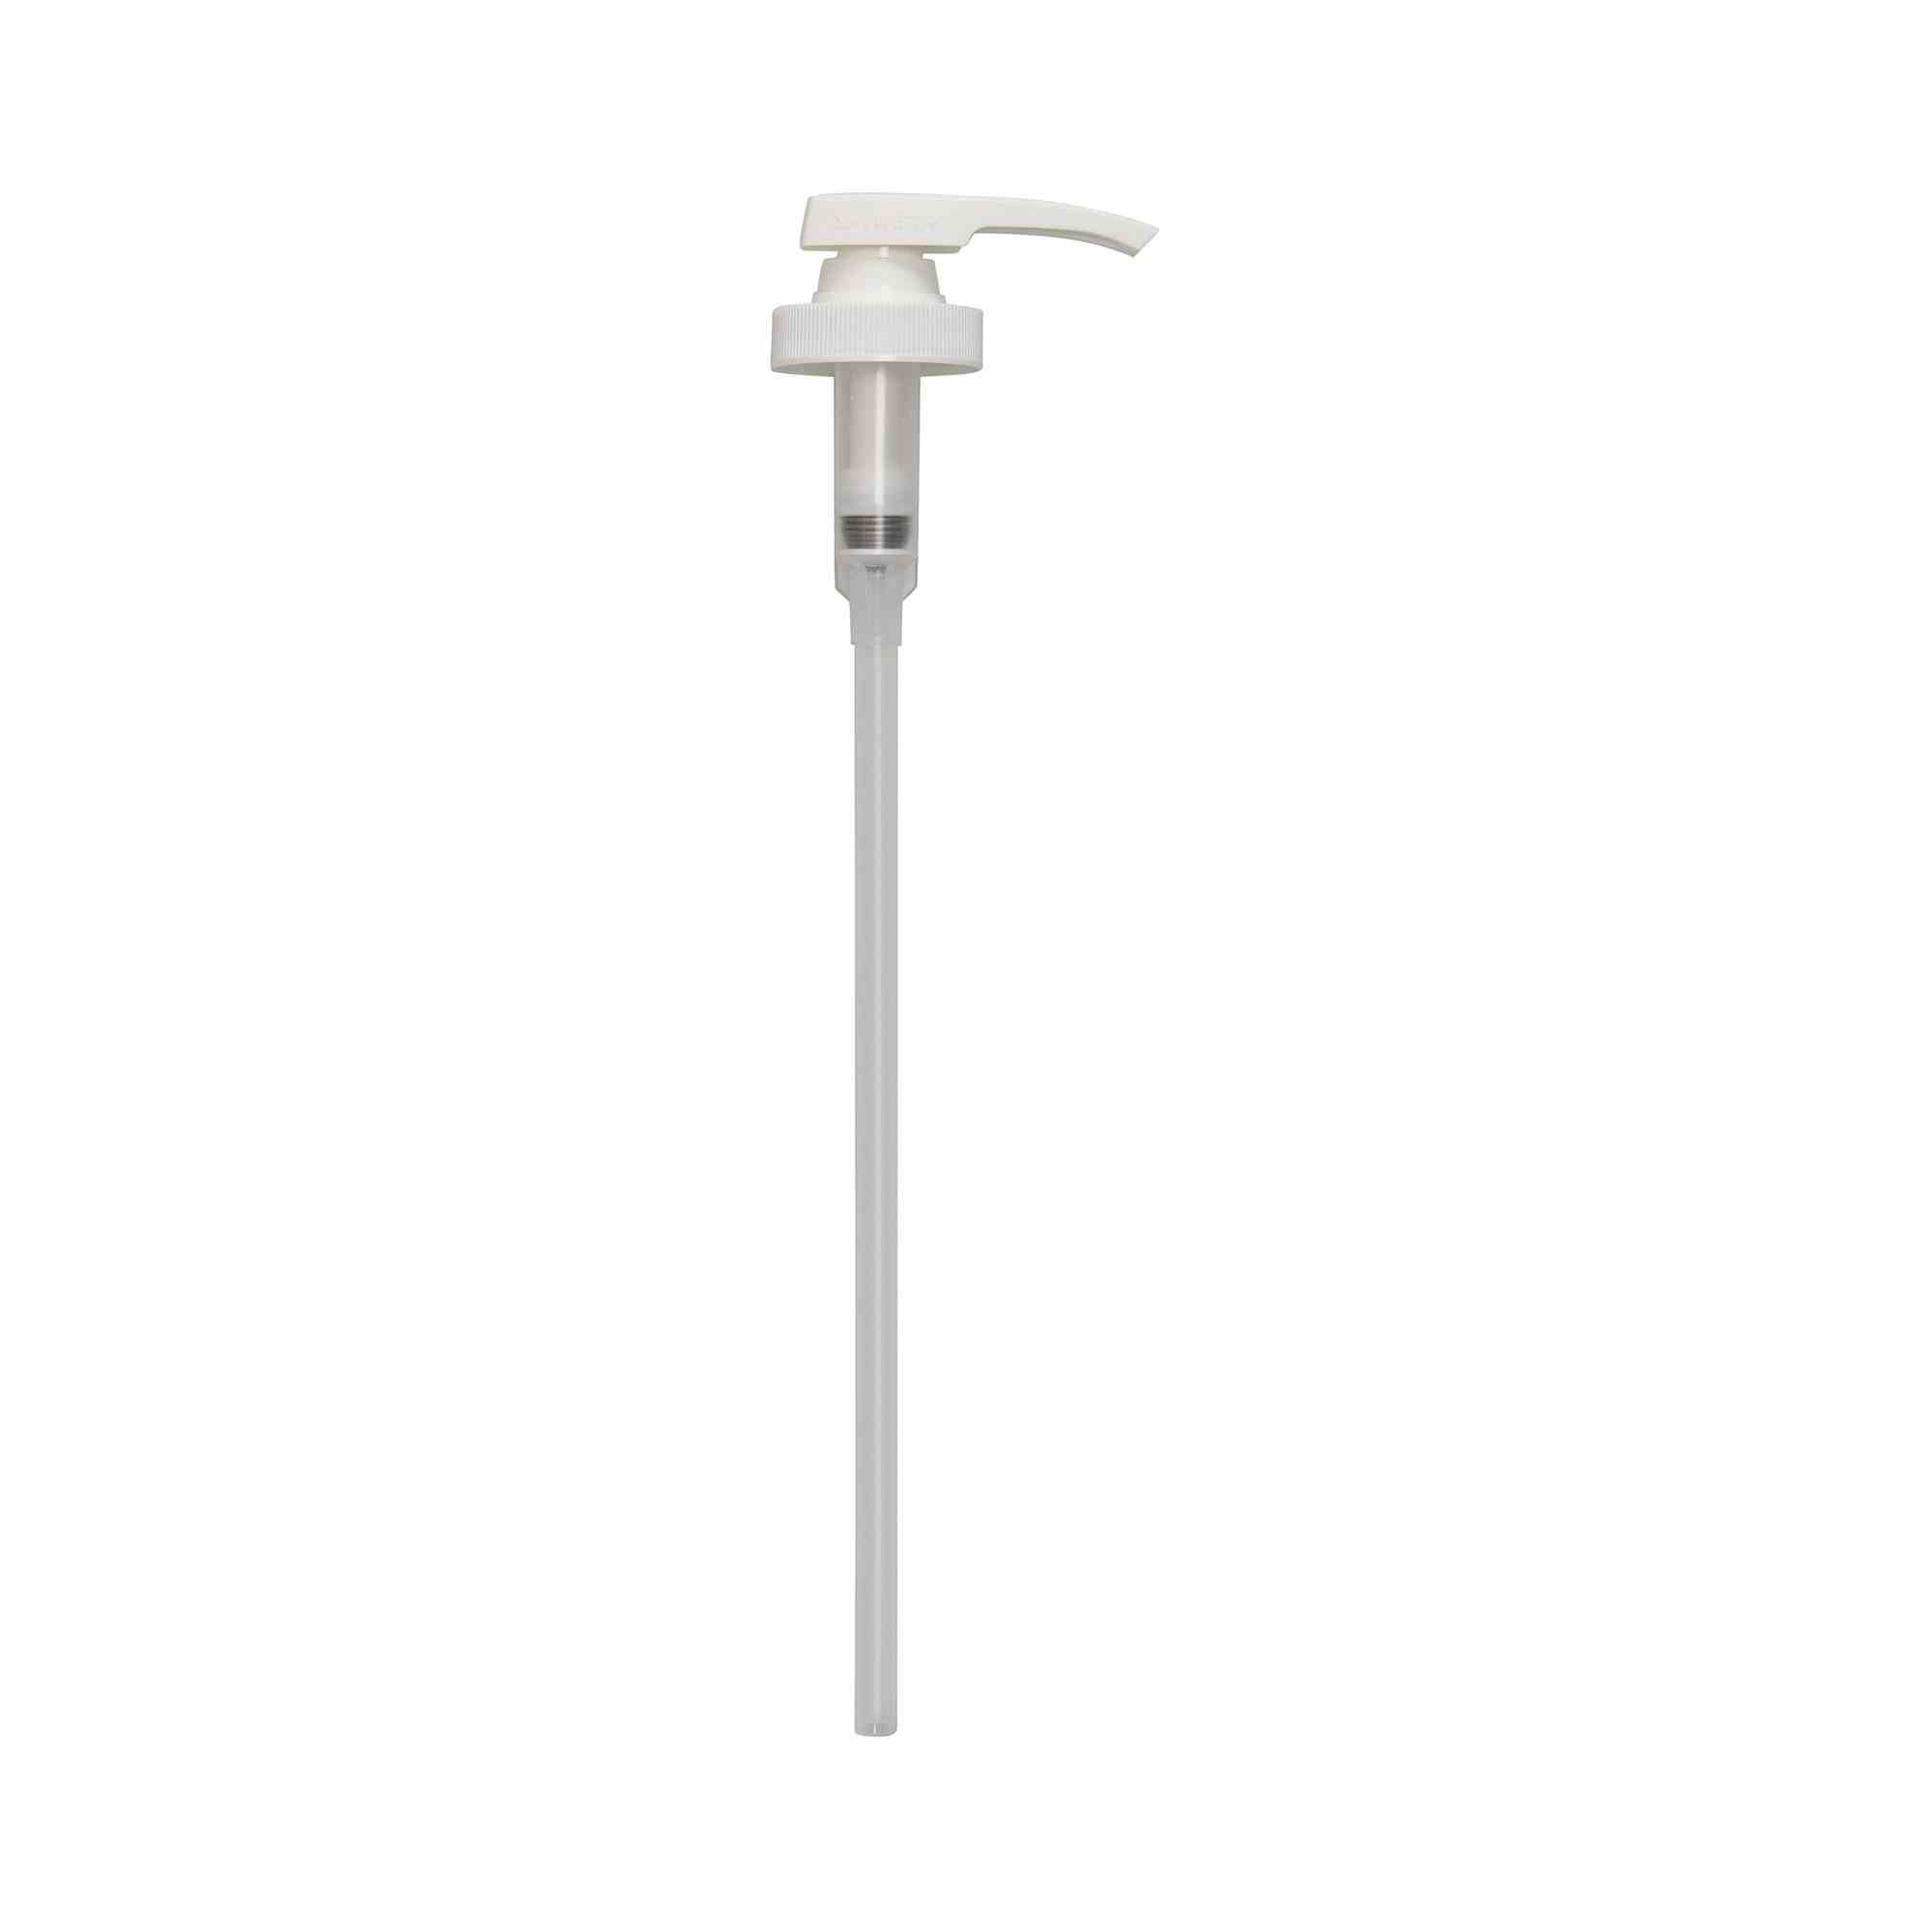 McKesson Hand Pump For Mounted 1 Gallon Bottle, 29901-128, 1 Each